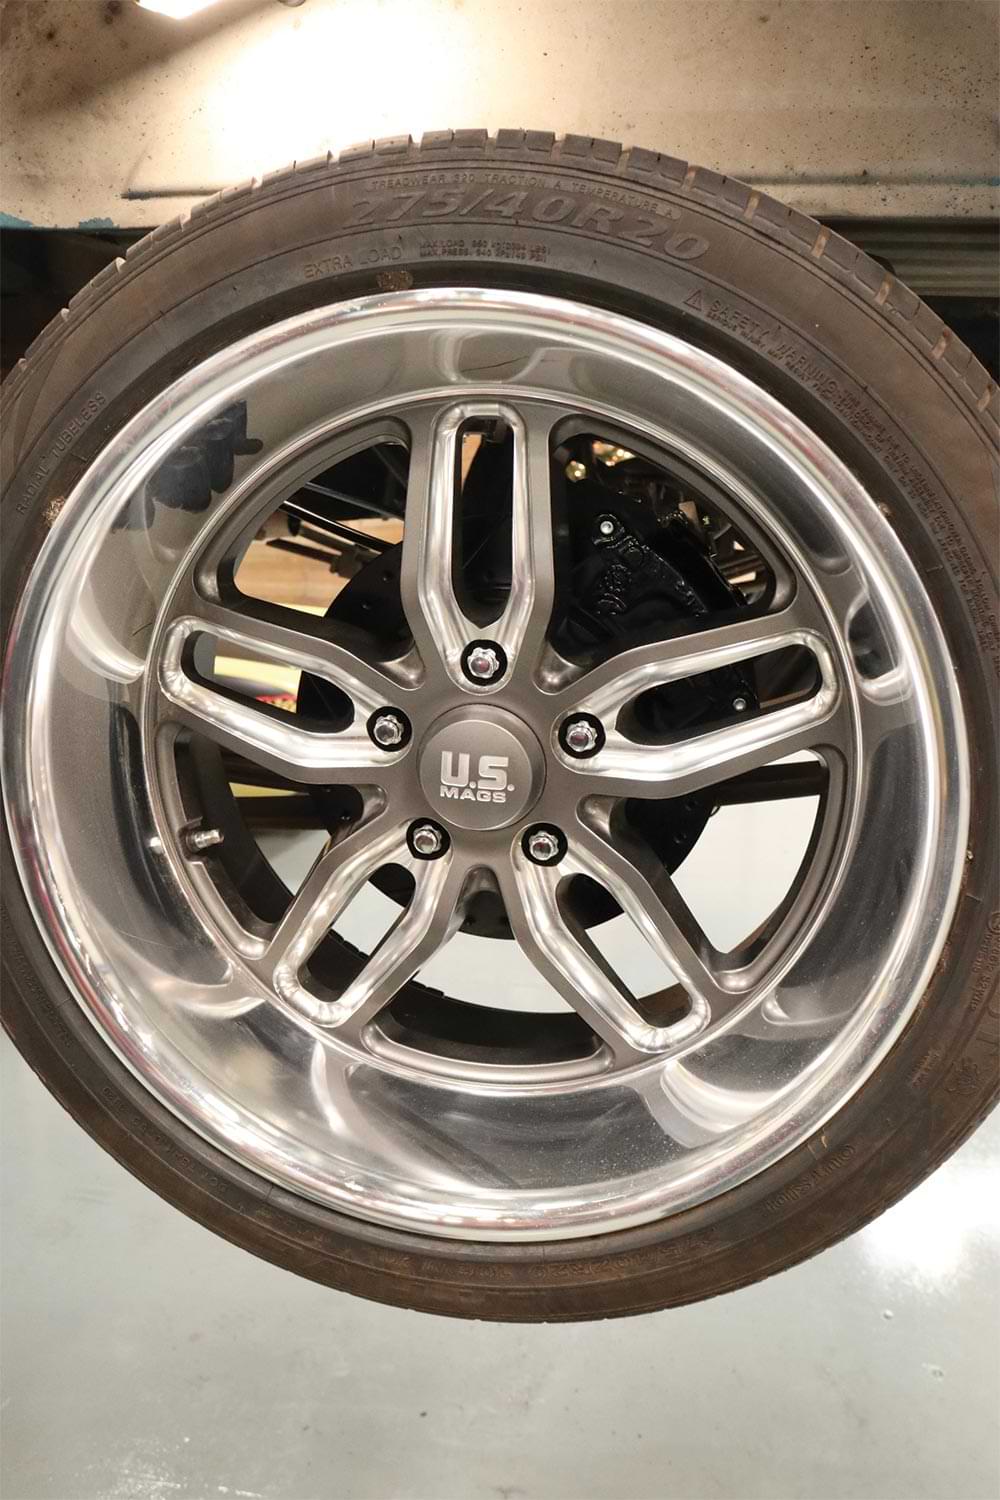 the newly installed brakes covered with a 20-inch contrast-cut U.S. Mags rimmed tire